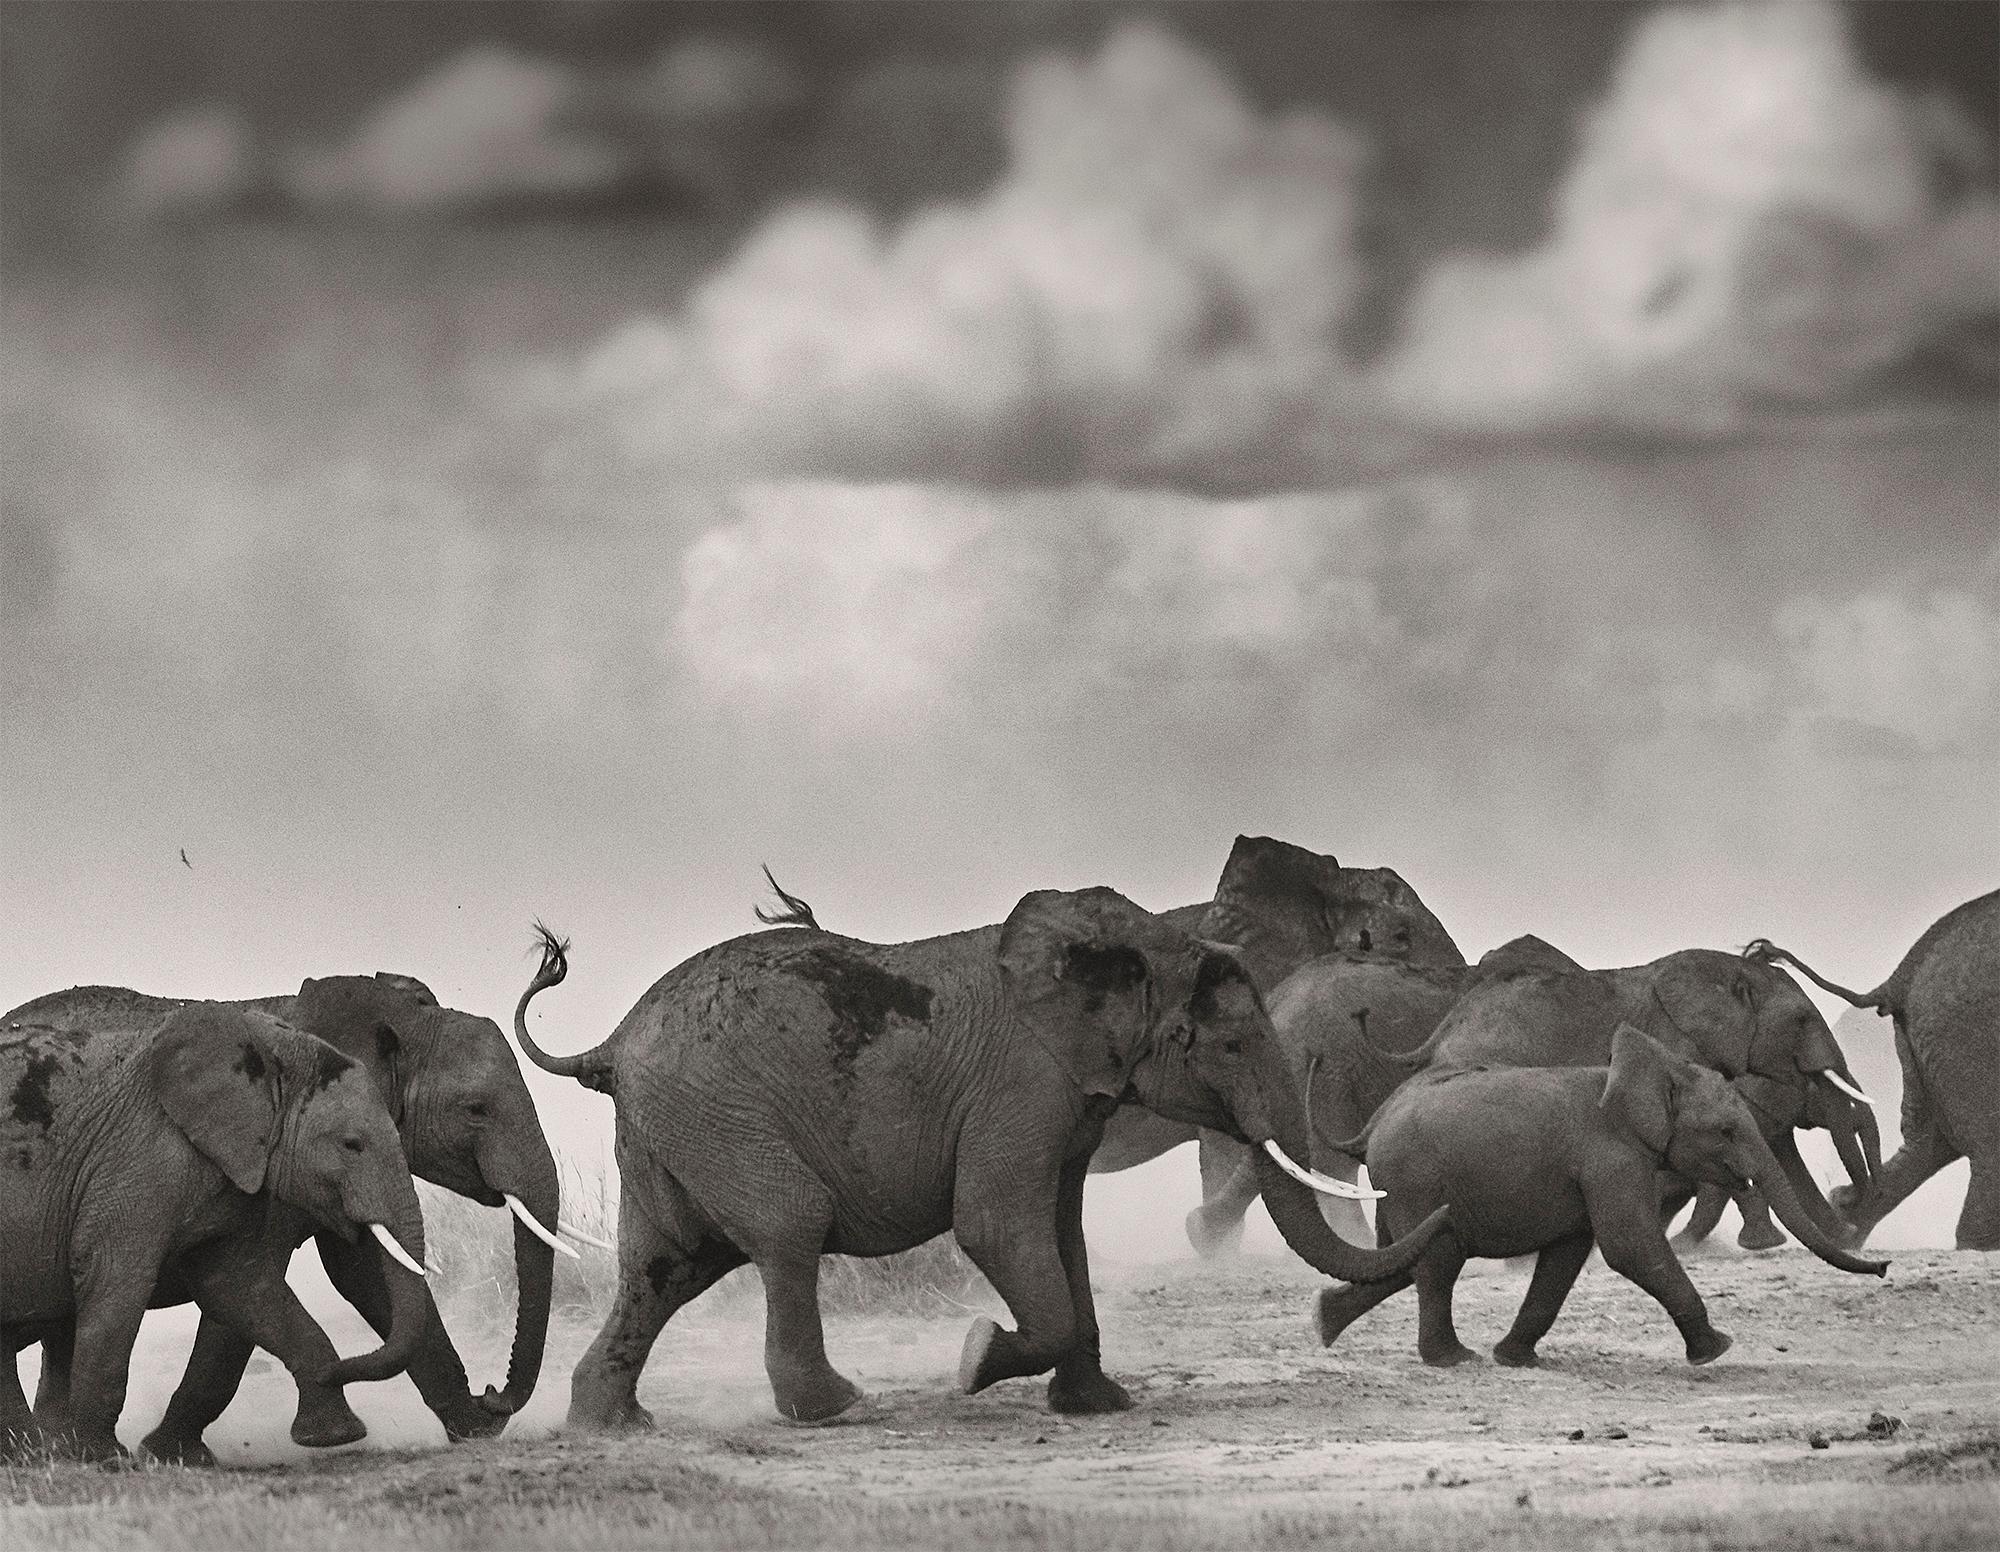 Thunderstorm II, Platinum, animal, elephant, black and white photography - Contemporary Photograph by Joachim Schmeisser